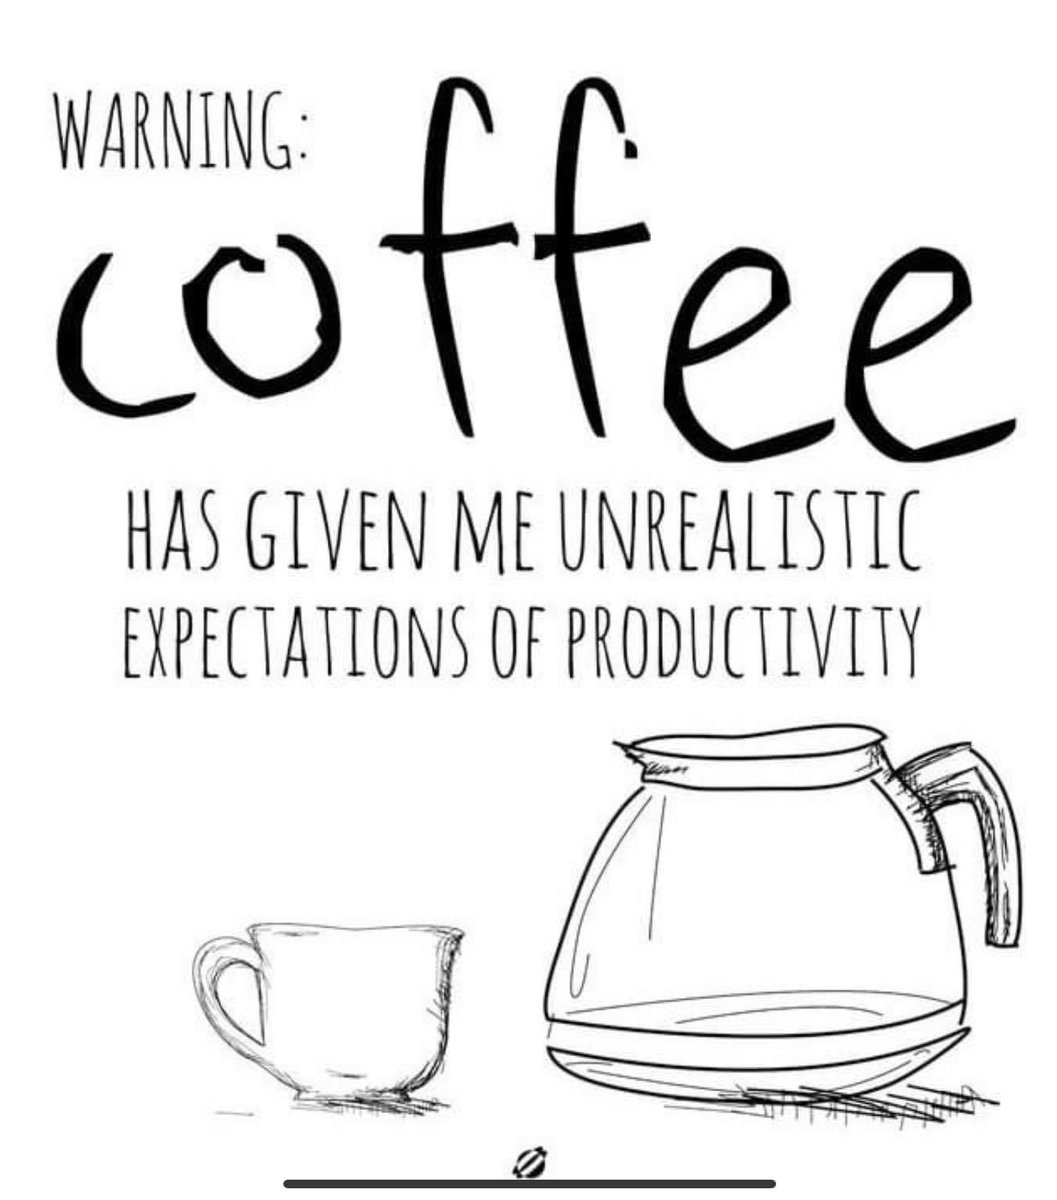 I've had so much coffee, my productivity chart is starting to look like a stock market peak. Warning: Coffee has given me unrealistic expectations of productivity.

#CoffeeTime #WorkFromHome #MondayMotivation #CaffeineBoost #DailyGrind